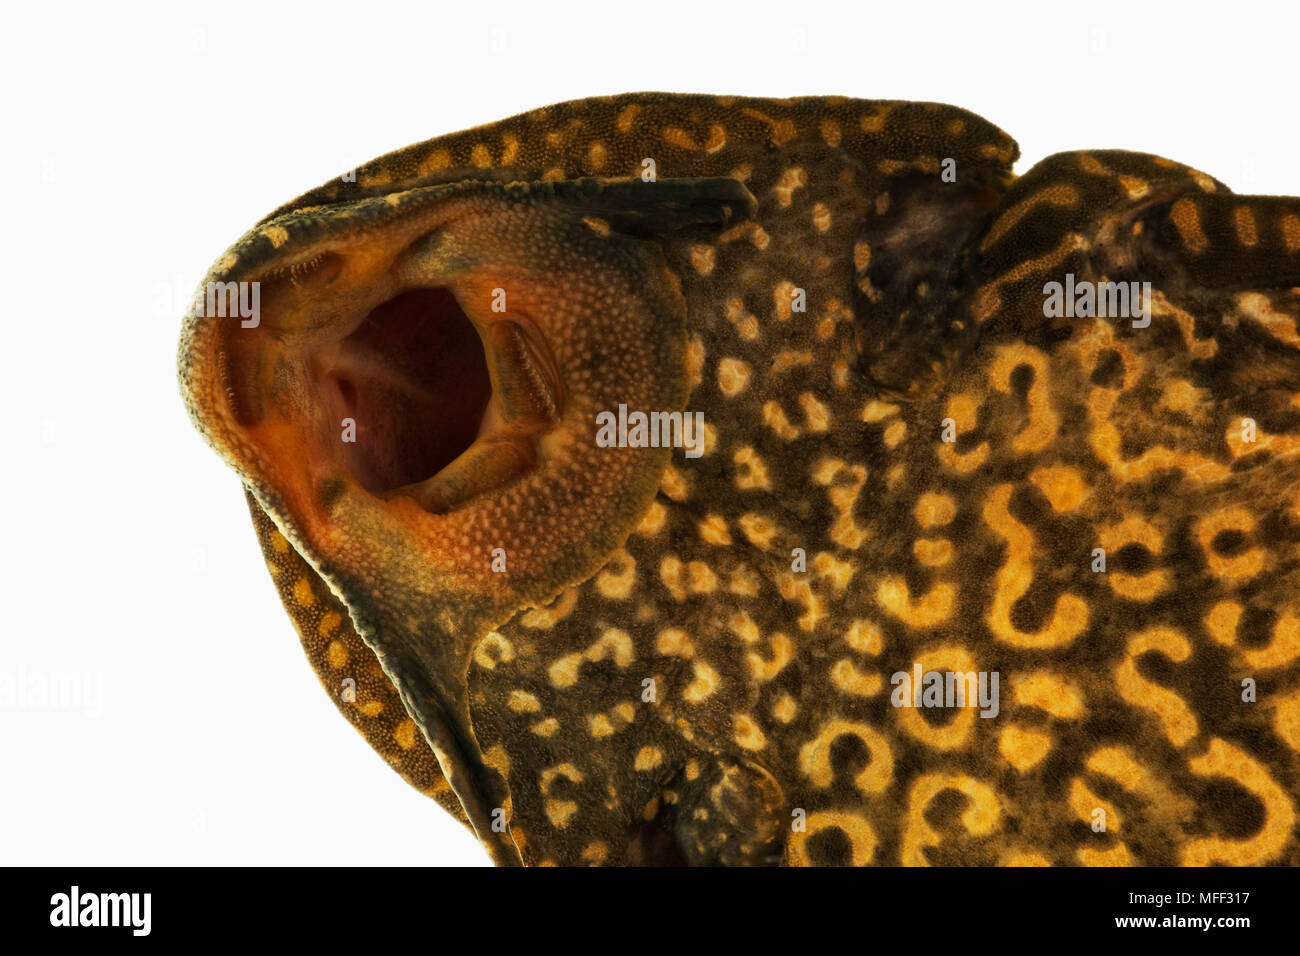 Sailfin Pleco fish (Glytoperichthys gibbiceps). Close up of mouth. Tropical freshwater fish also known as Common Pleco or Leopard Pleco. Dist. Brazil, Stock Photo